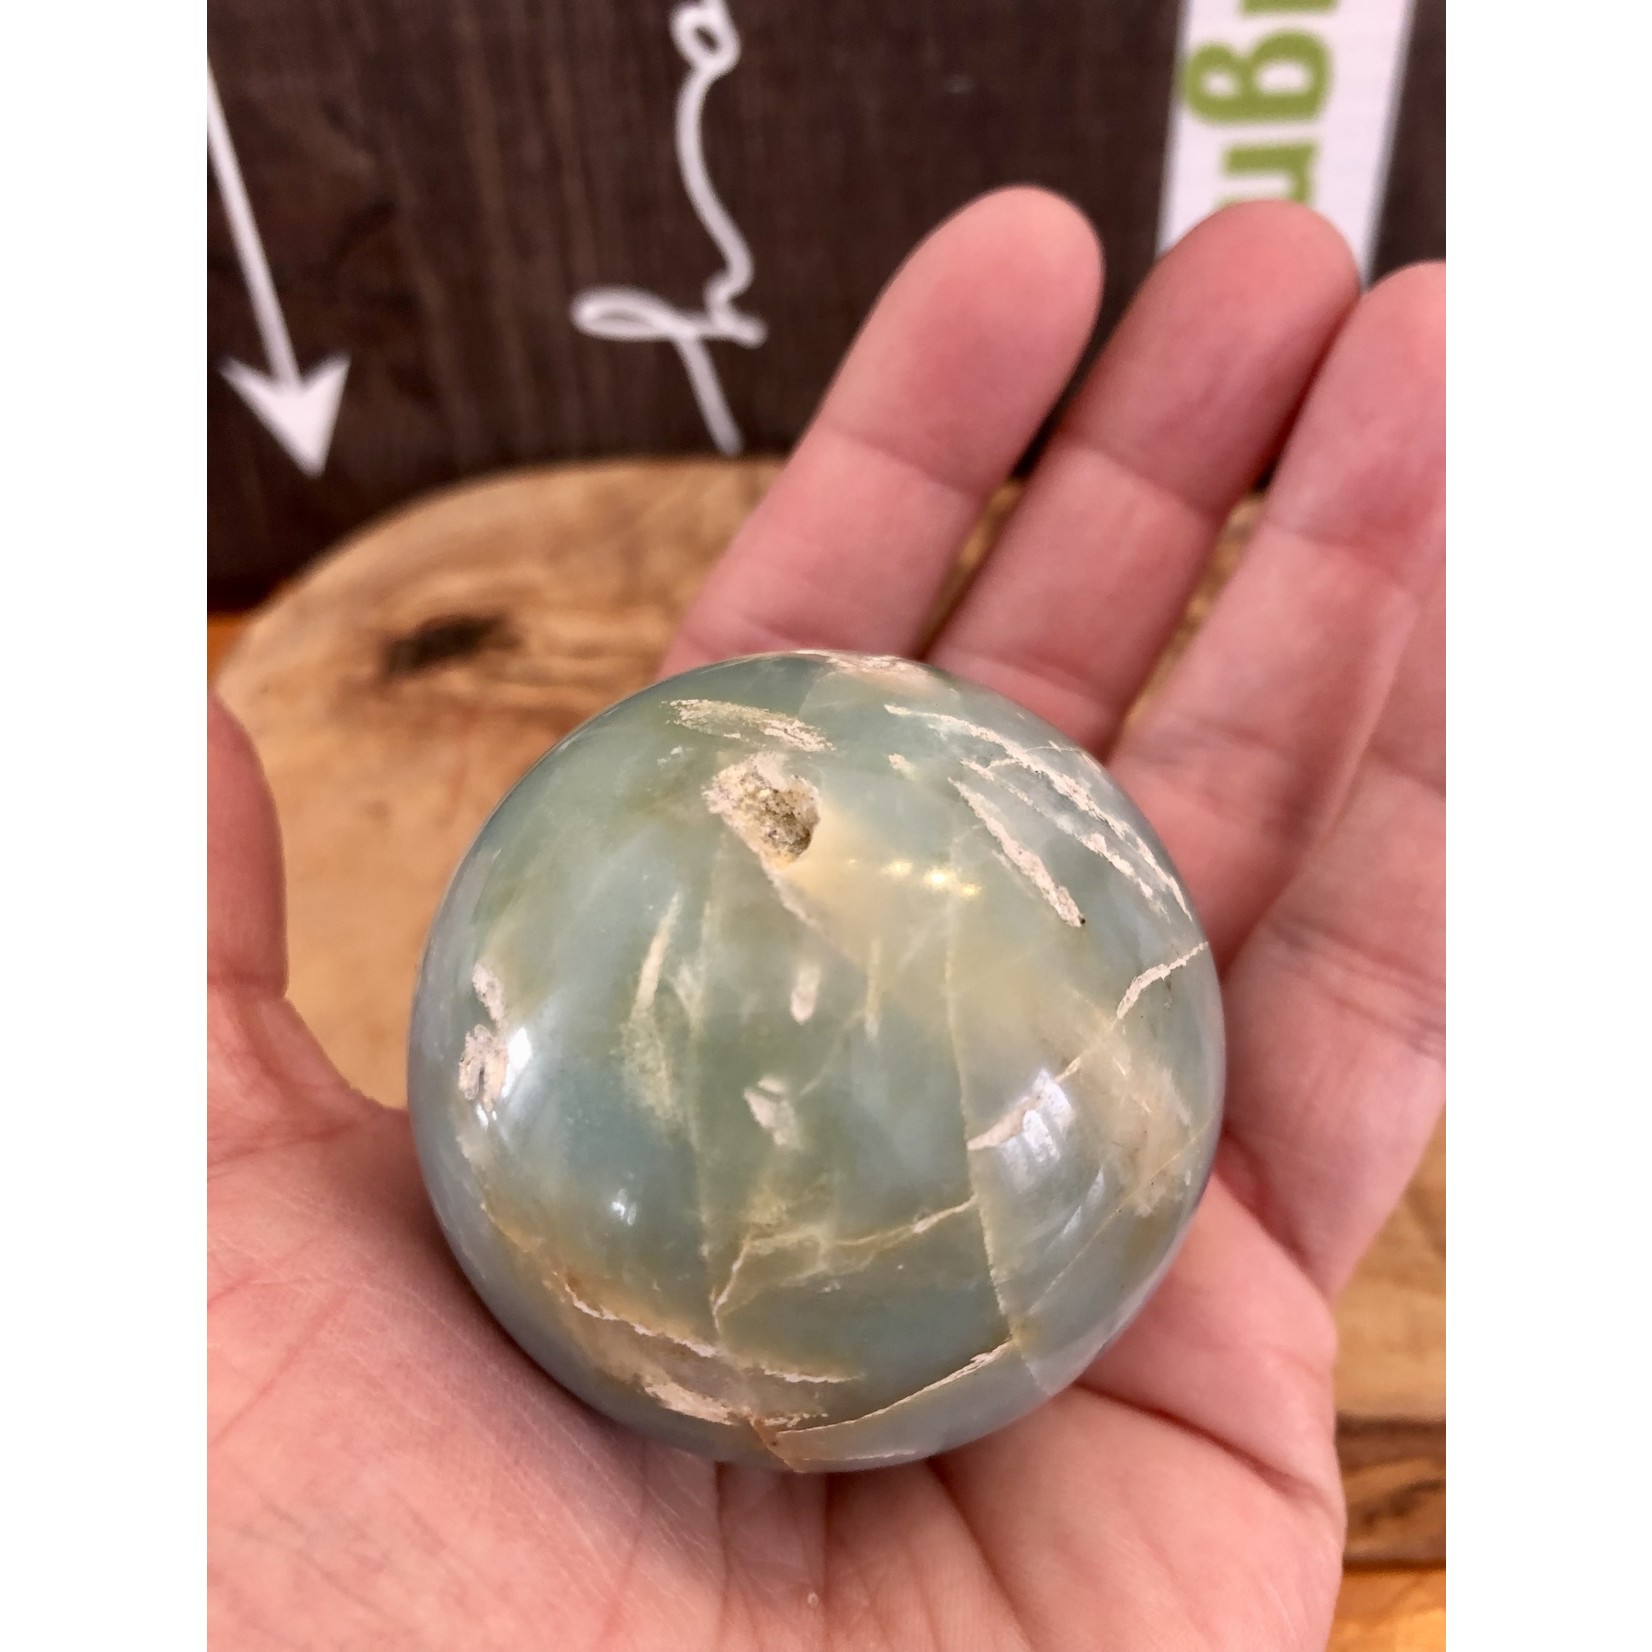 large caribbean calcite sphere, looks like a globe, purifies and aligns the chakras, balances the yin and yang energies